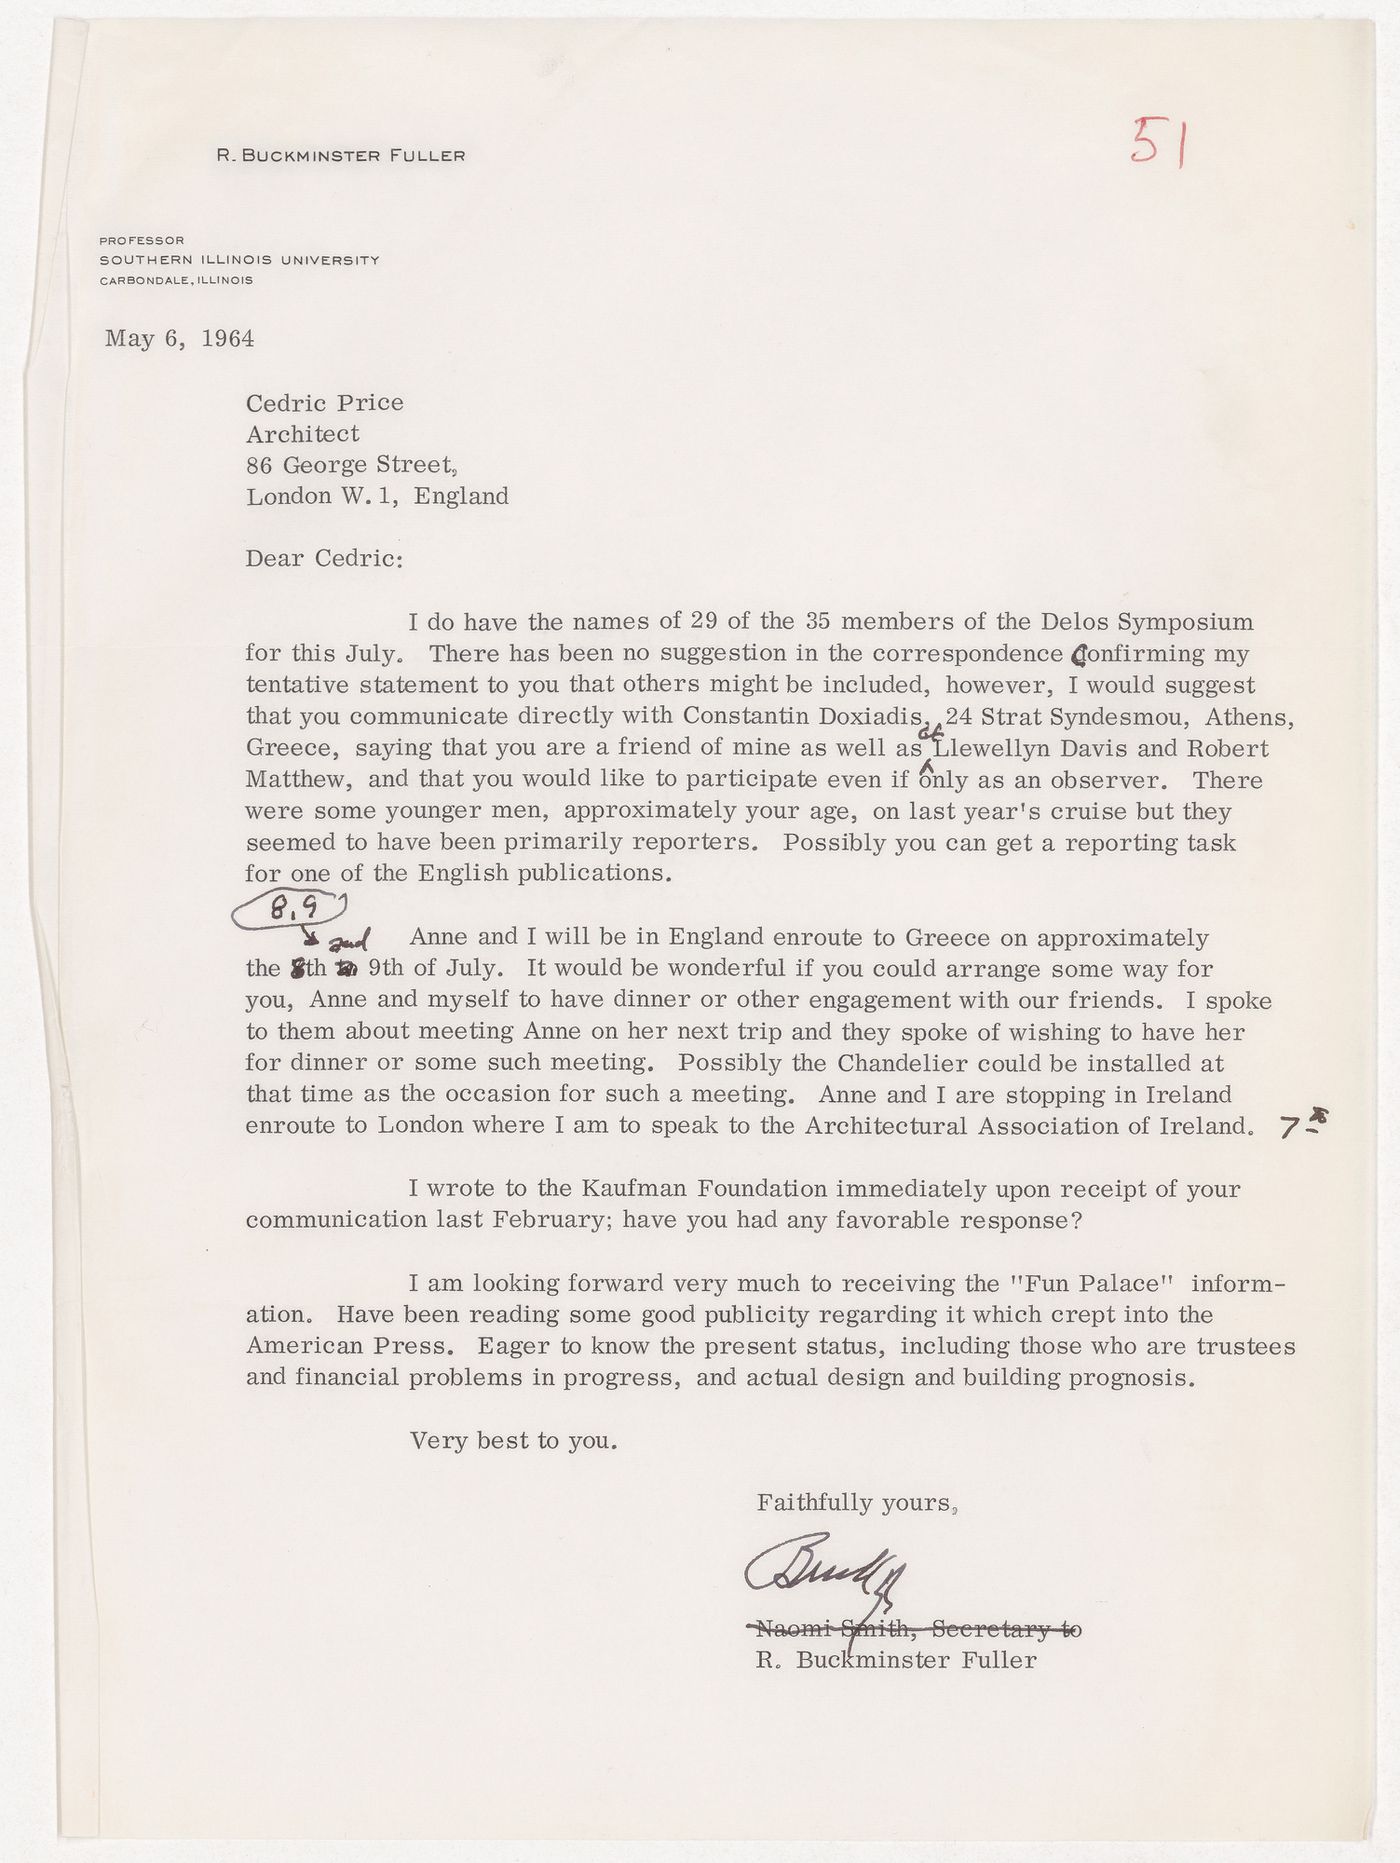 Letter from R. Buckminster Fuller to Cedric Price about the Delos Symposium